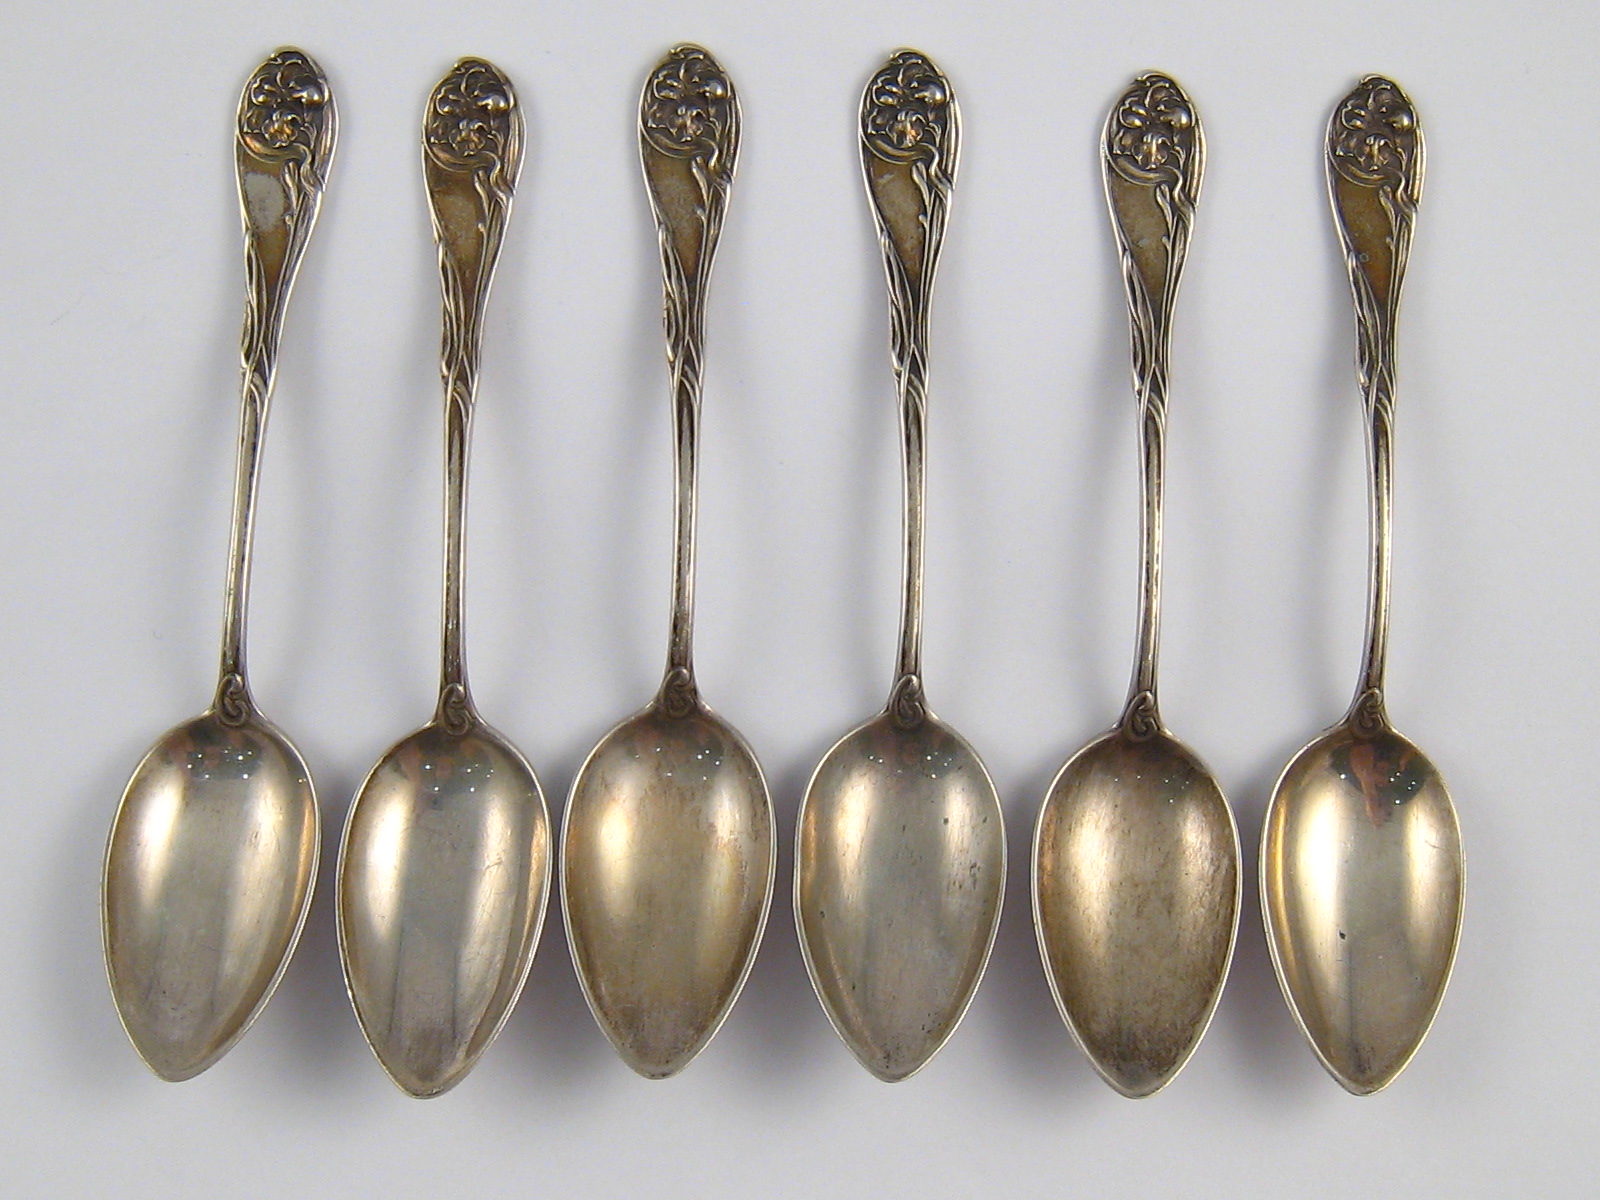 A set of six German 800 assay silver spoons, length 13.5cm. wt. 117gm. - Image 2 of 2